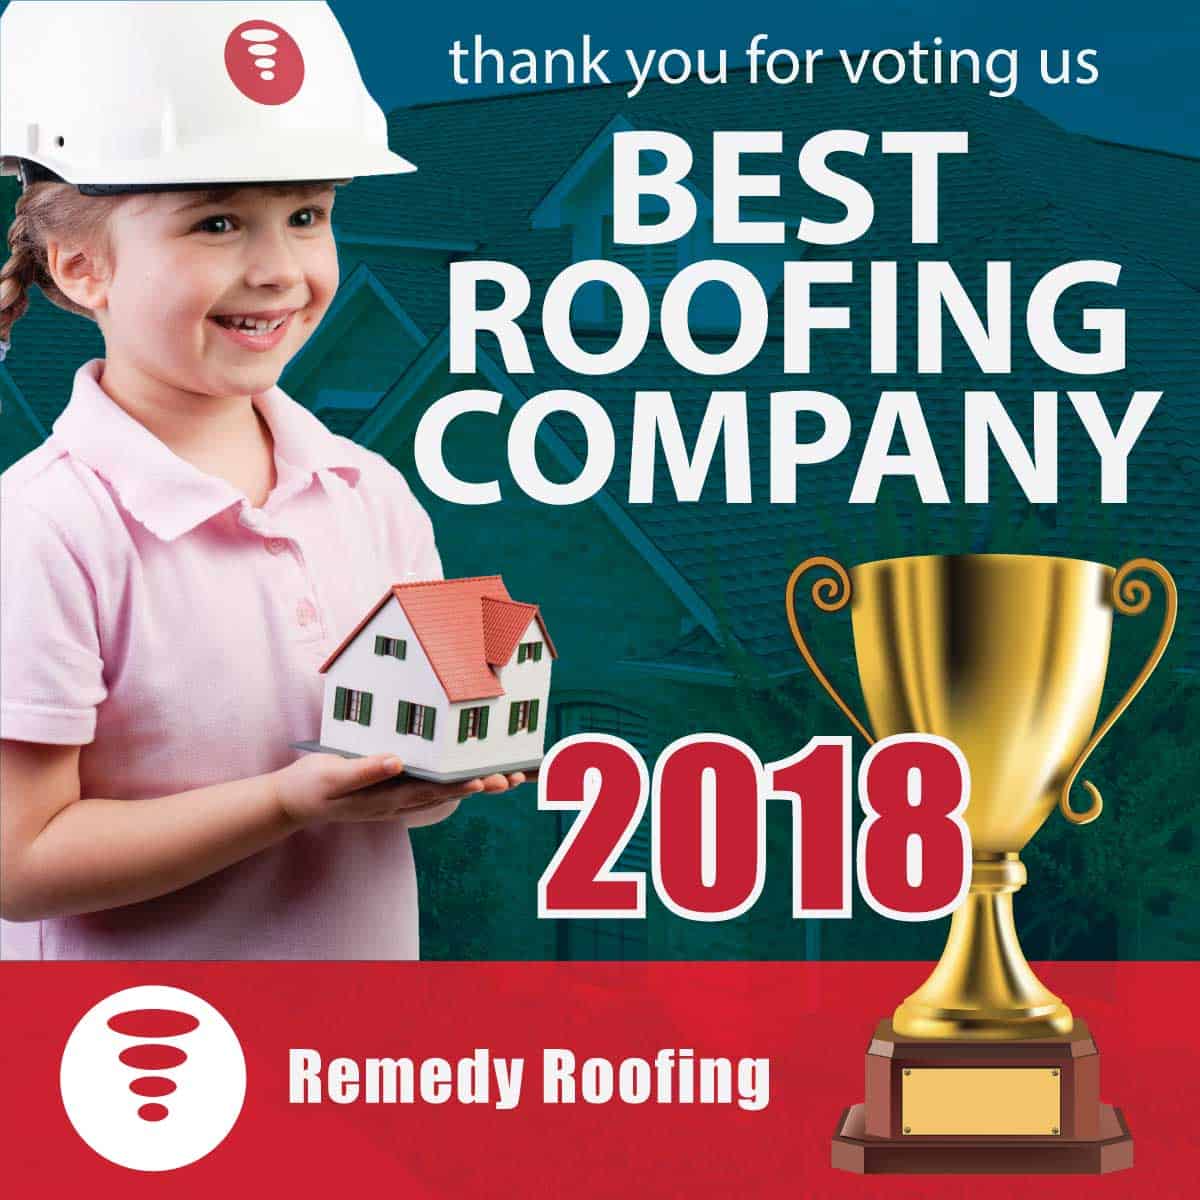 Remedy has been voted "Best Roofing Company" 2018